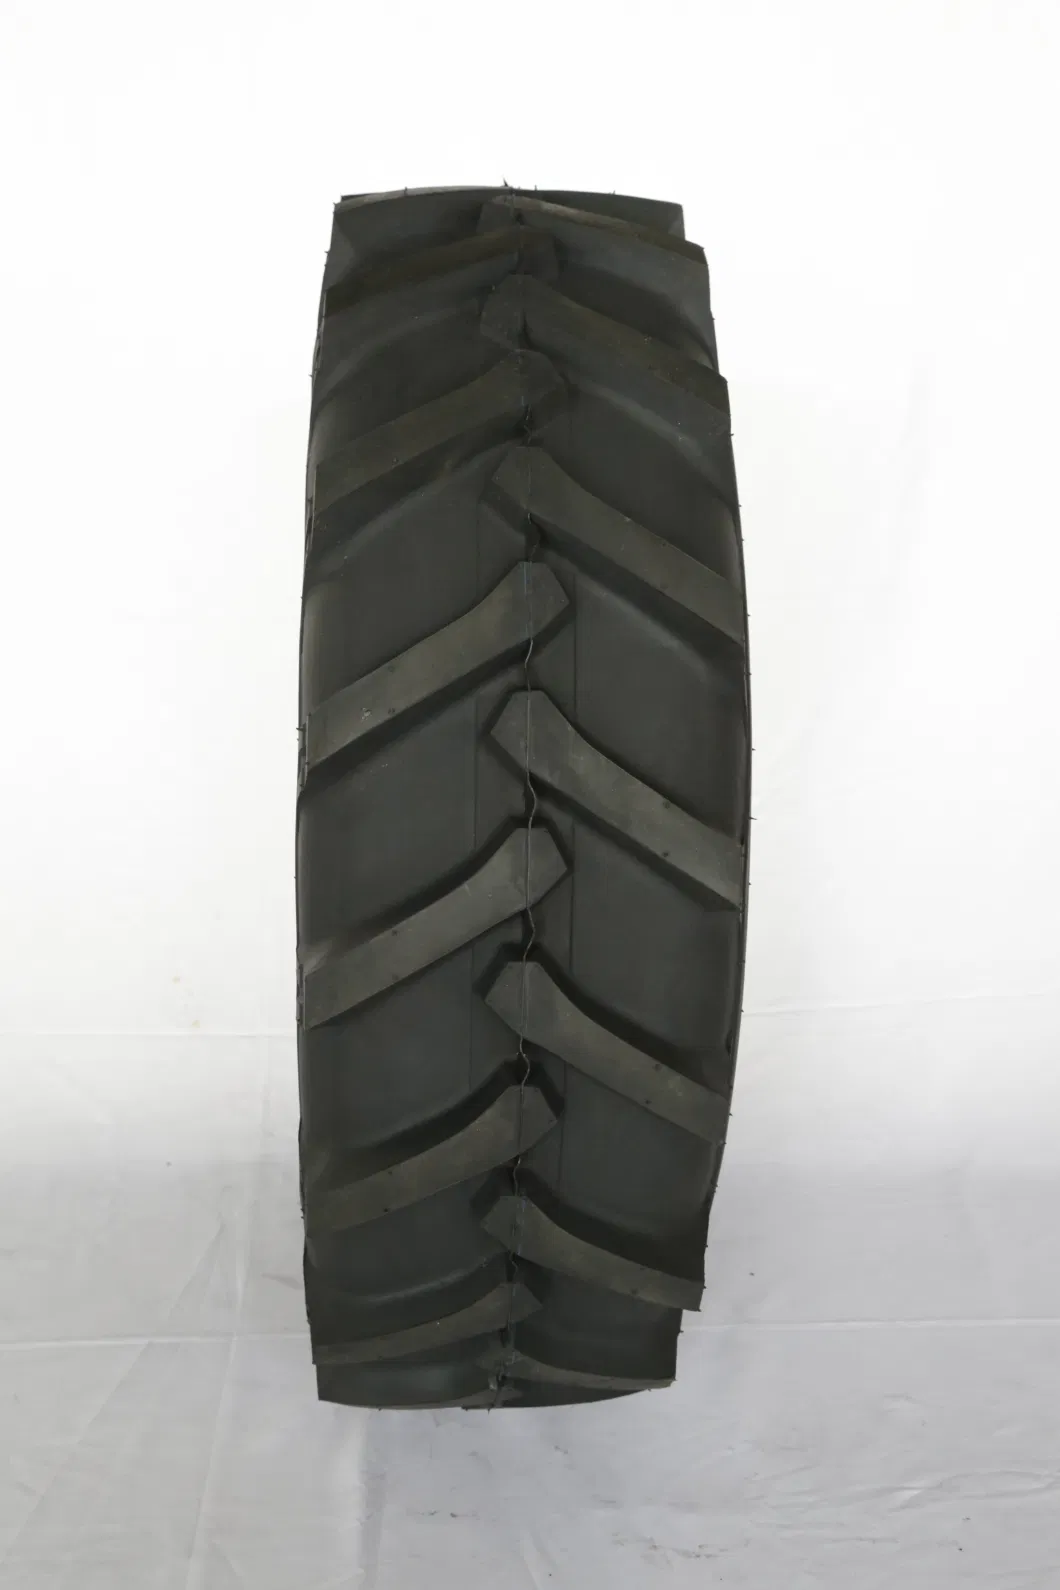 Pr-1 Agr Farm Tractor Agricultural Paddy Field Rubber Bias Tyre 16.9-28 12.4-28 13.6-38 14.9-30 16.9-34